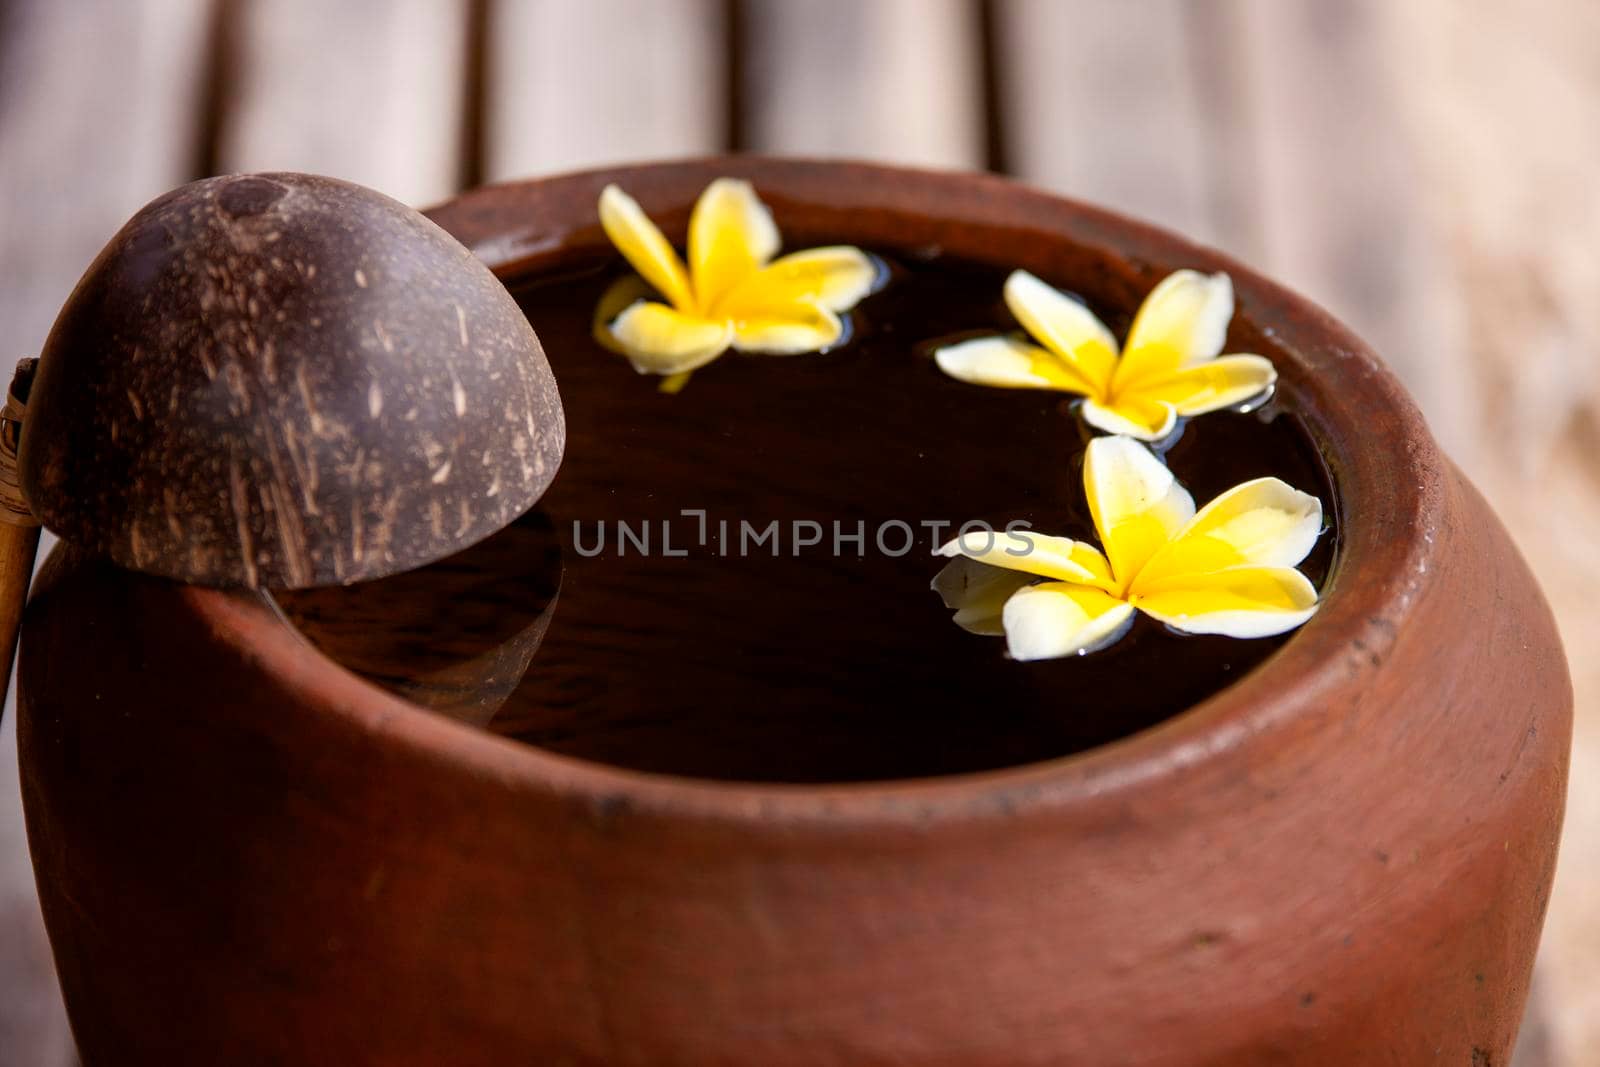 Clay jug with flower plumeria or frangipani decorated on water. Bowl in zen style for spa meditation mood by Jyliana